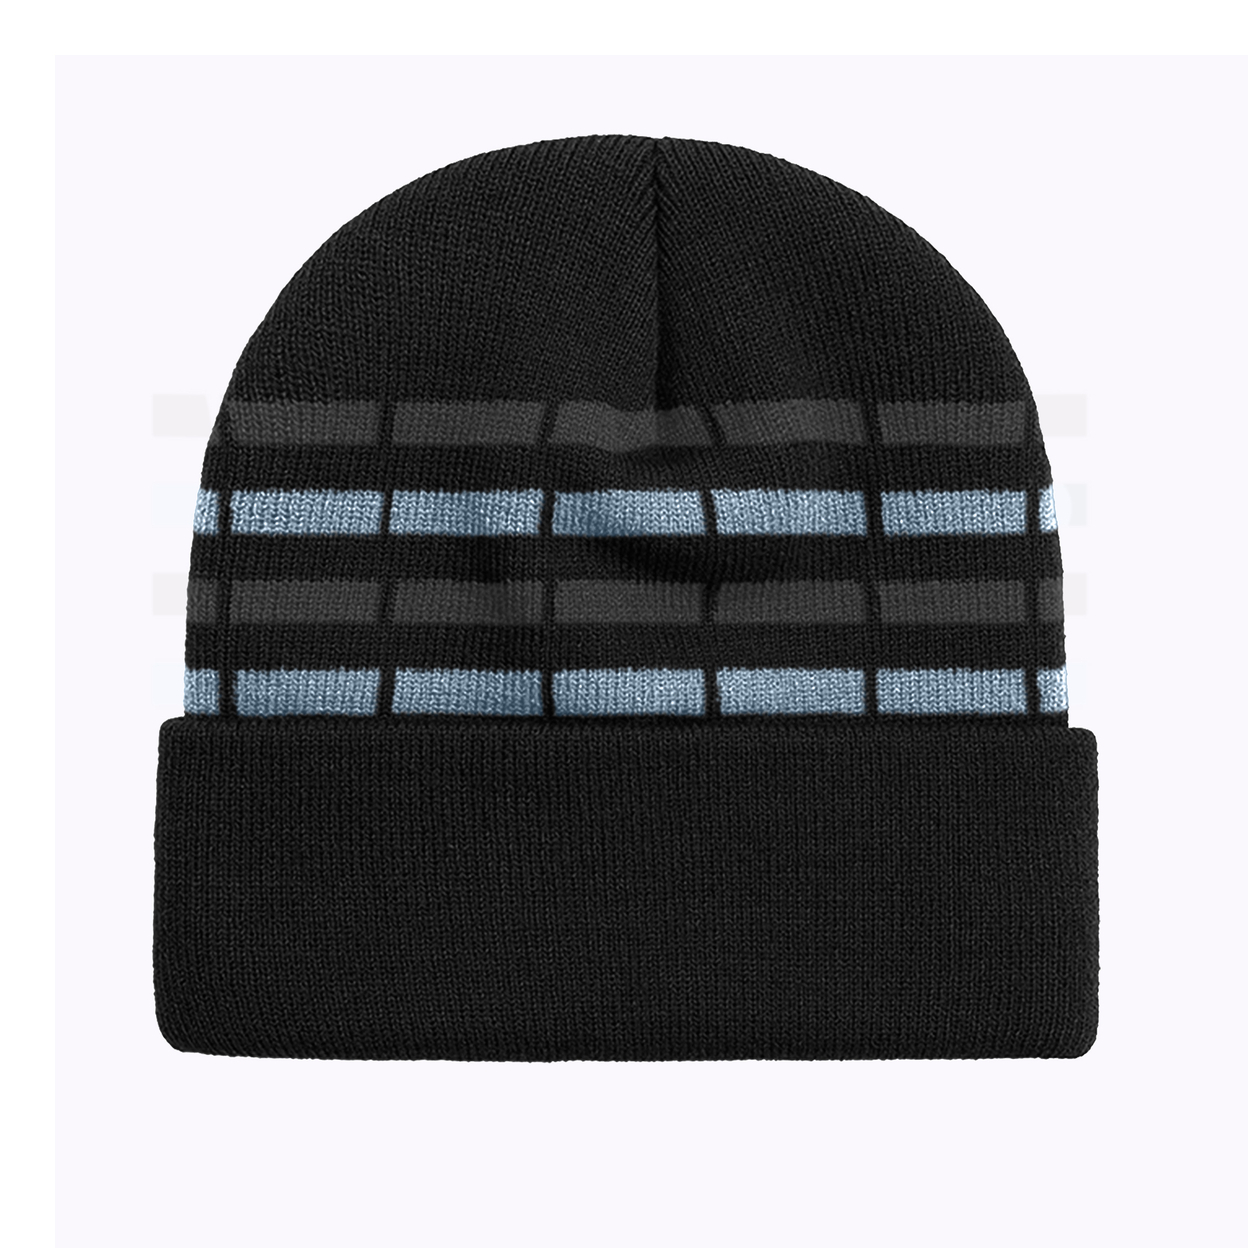 2-Pack Men's Winter Warm Cozy Knit Cuffed Solid & Striped Beanie Hat With Faux Fur Lining - Black Striped / Navy Solid